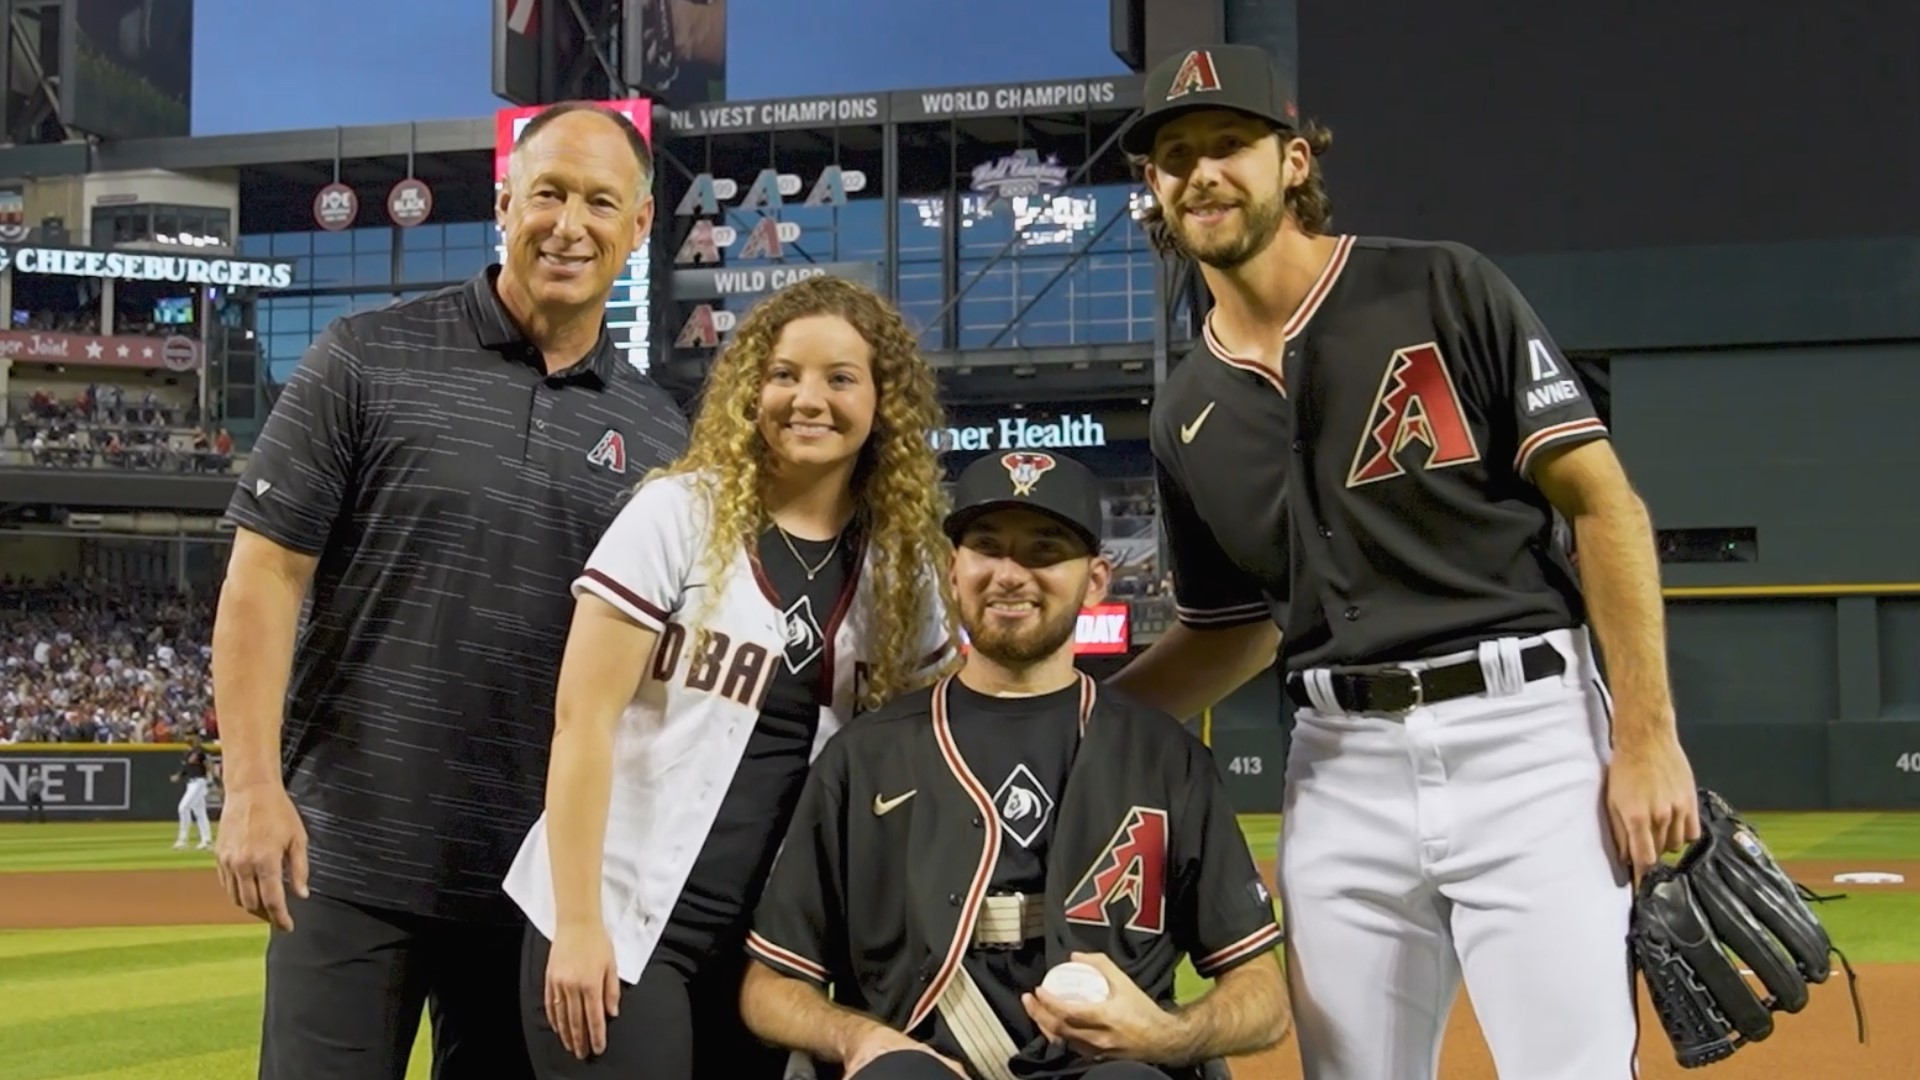 Phoenix officer Tyler Moldovan, who survived getting shot eight times in 2021, threw the first pitch at D-backs game Thursday. Courtesy: Kelsey Grant